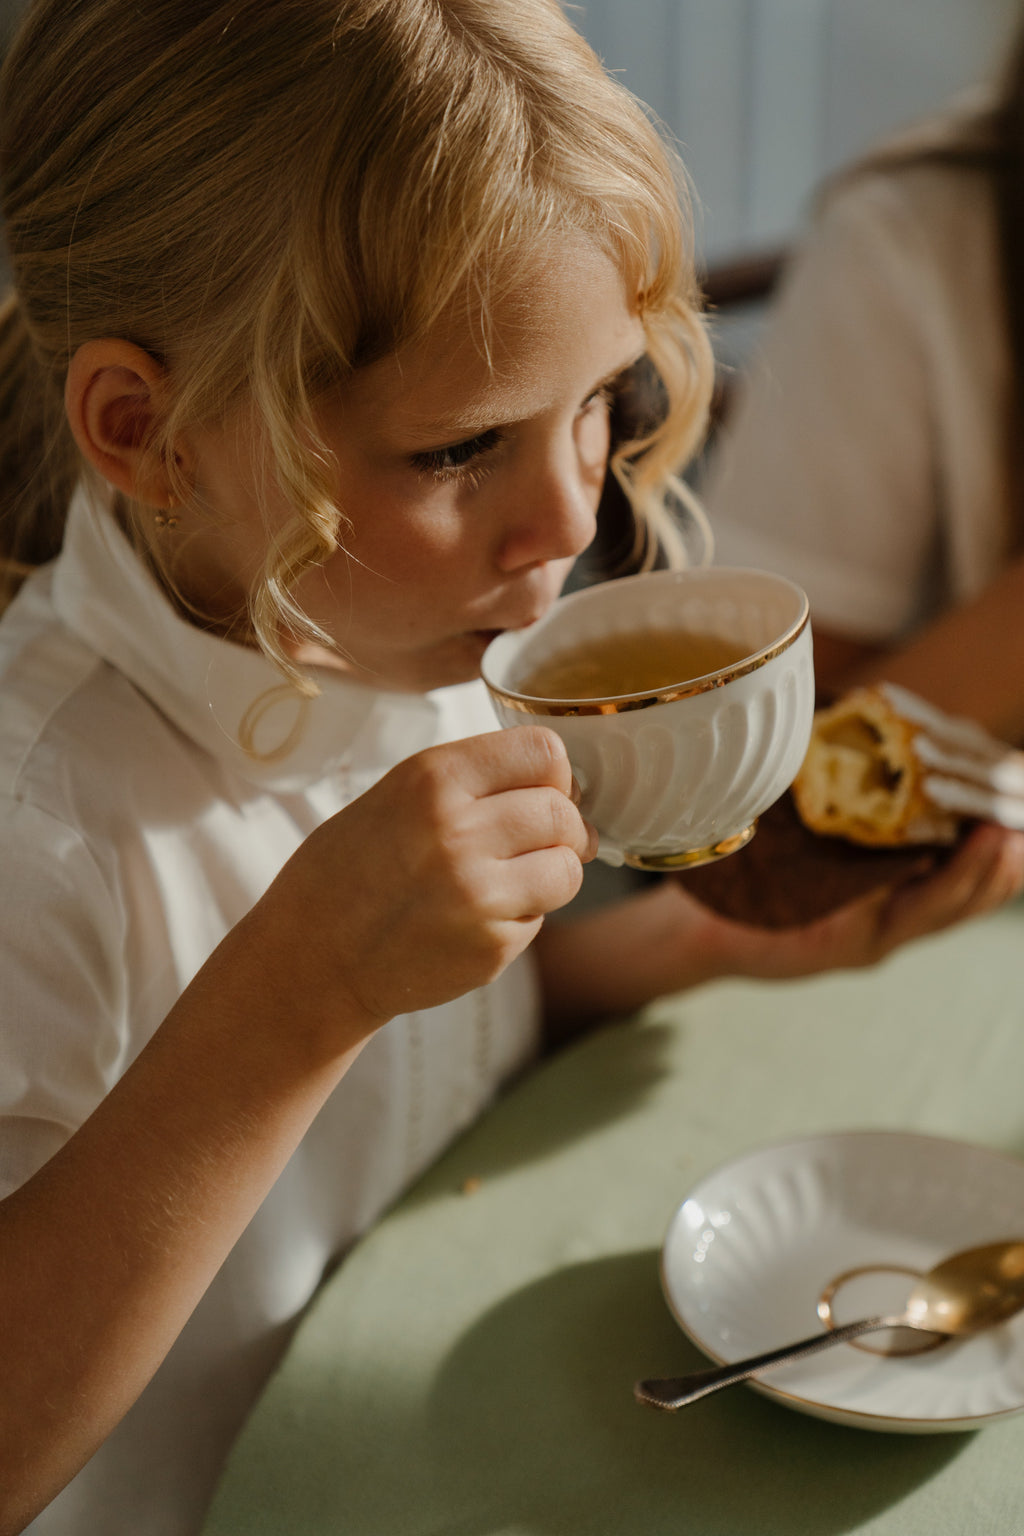 Nurturing Traditions: Serving Tea to Children with Care and Creativity